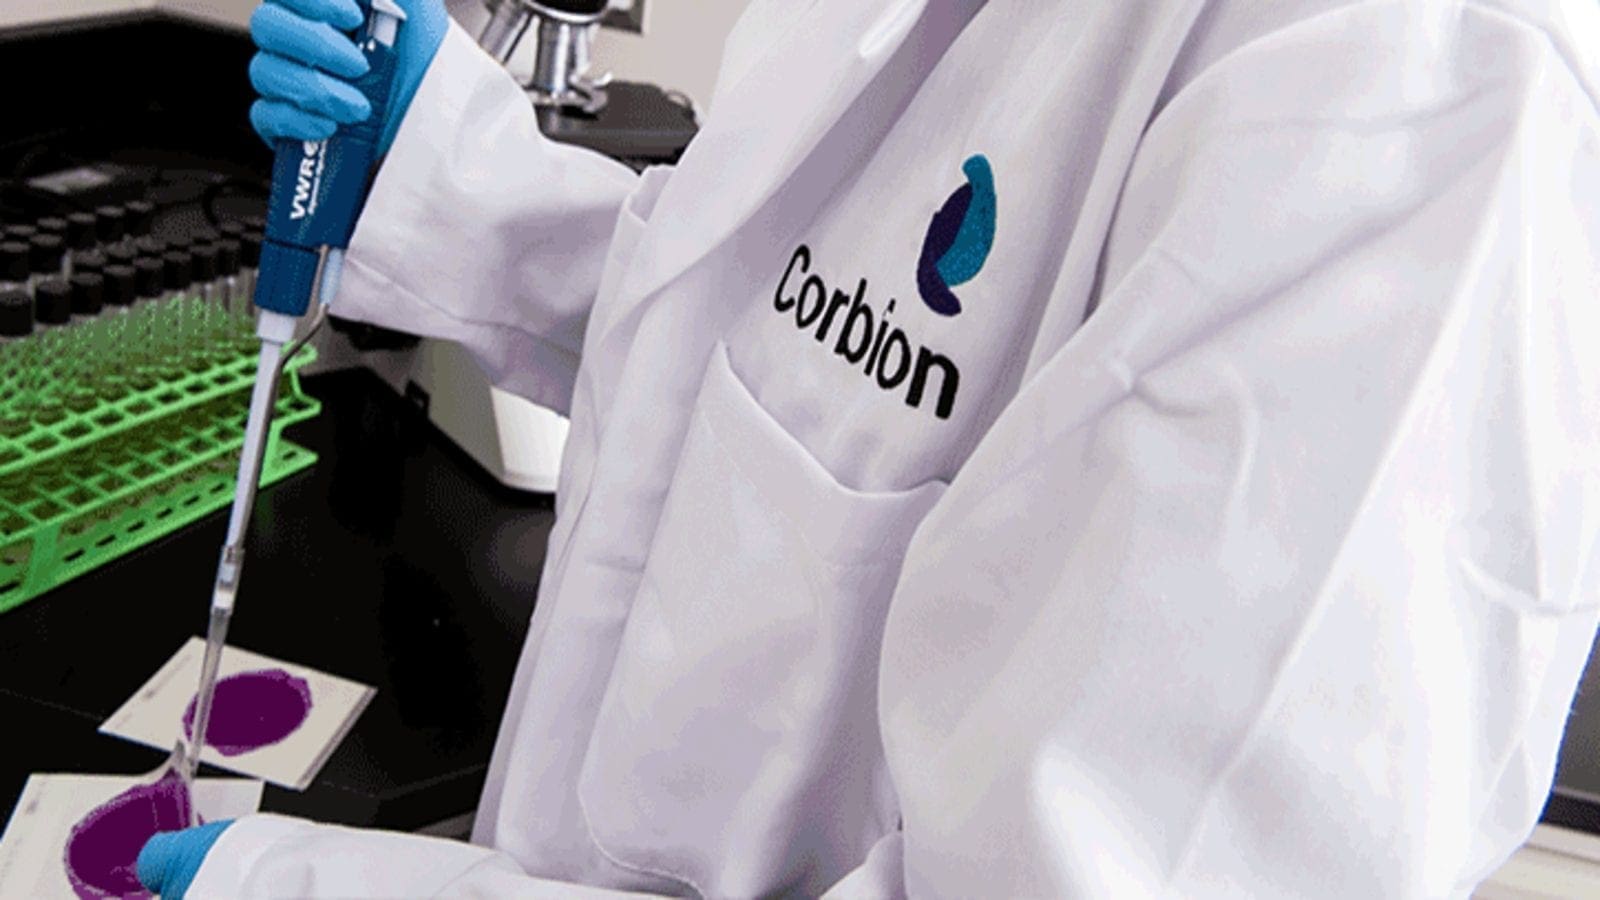 Corbion upgrades listeria control model to bolster food safety efforts